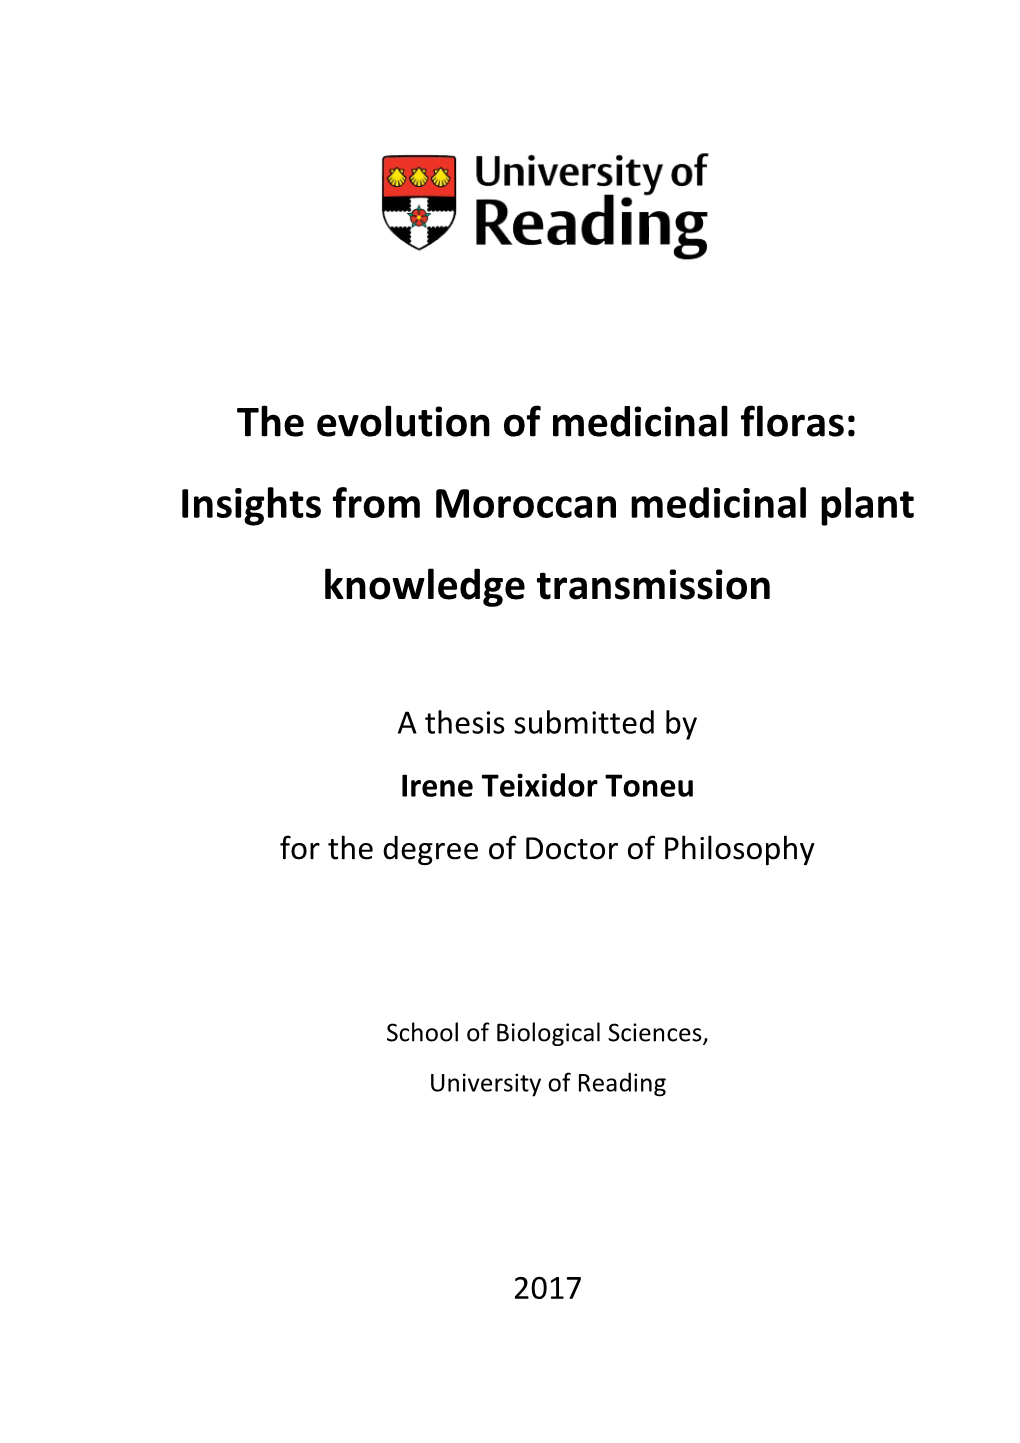 Insights from Moroccan Medicinal Plant Knowledge Transmission